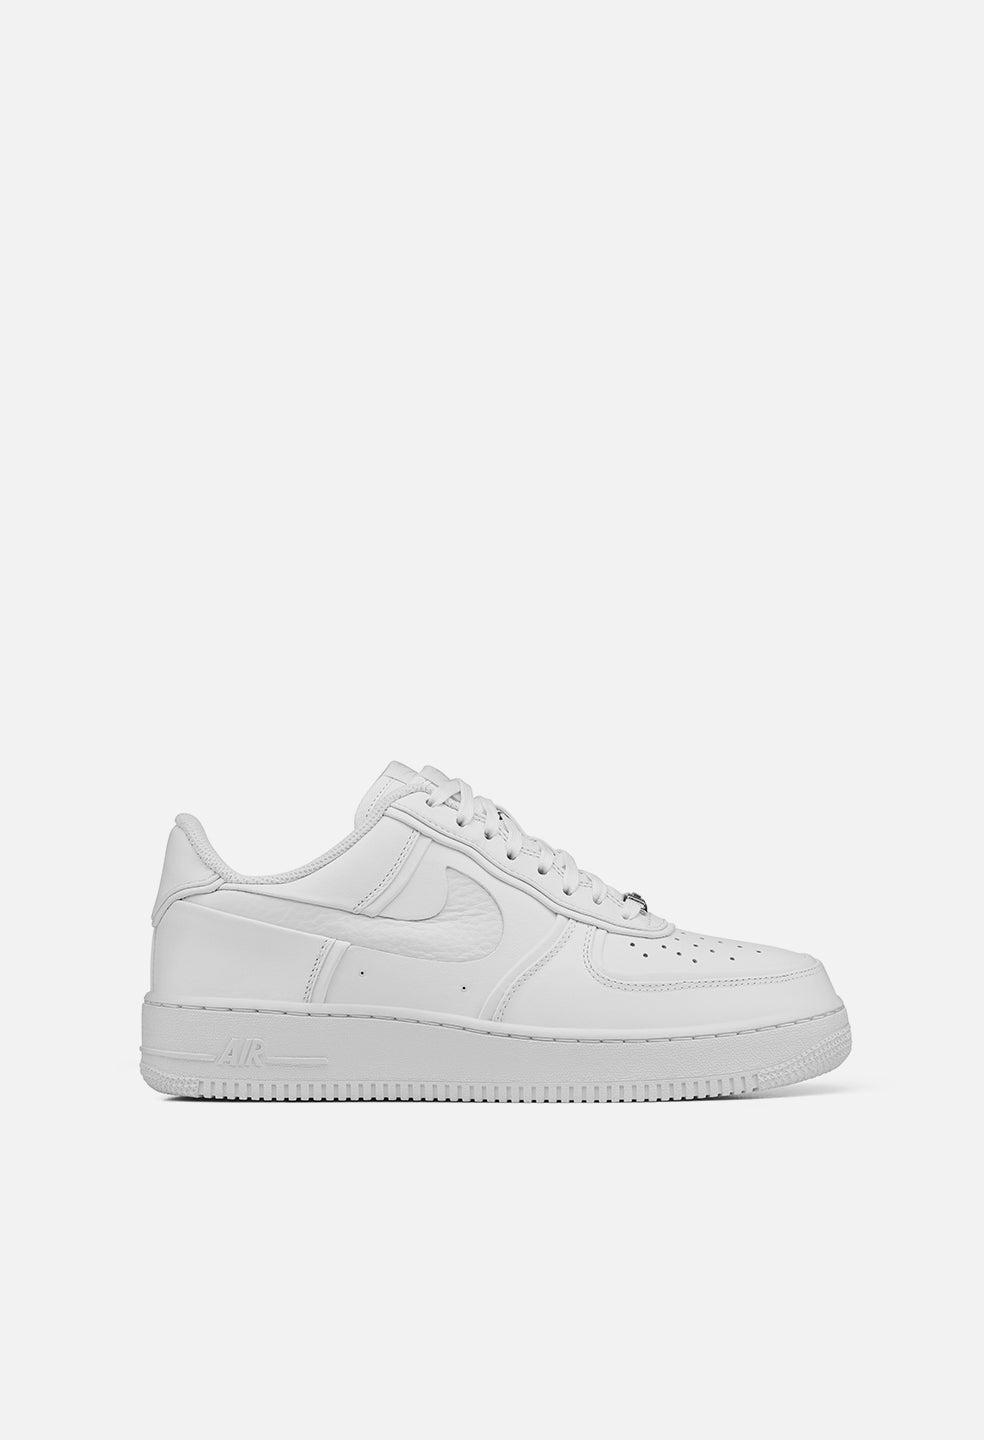 do air force ones run small